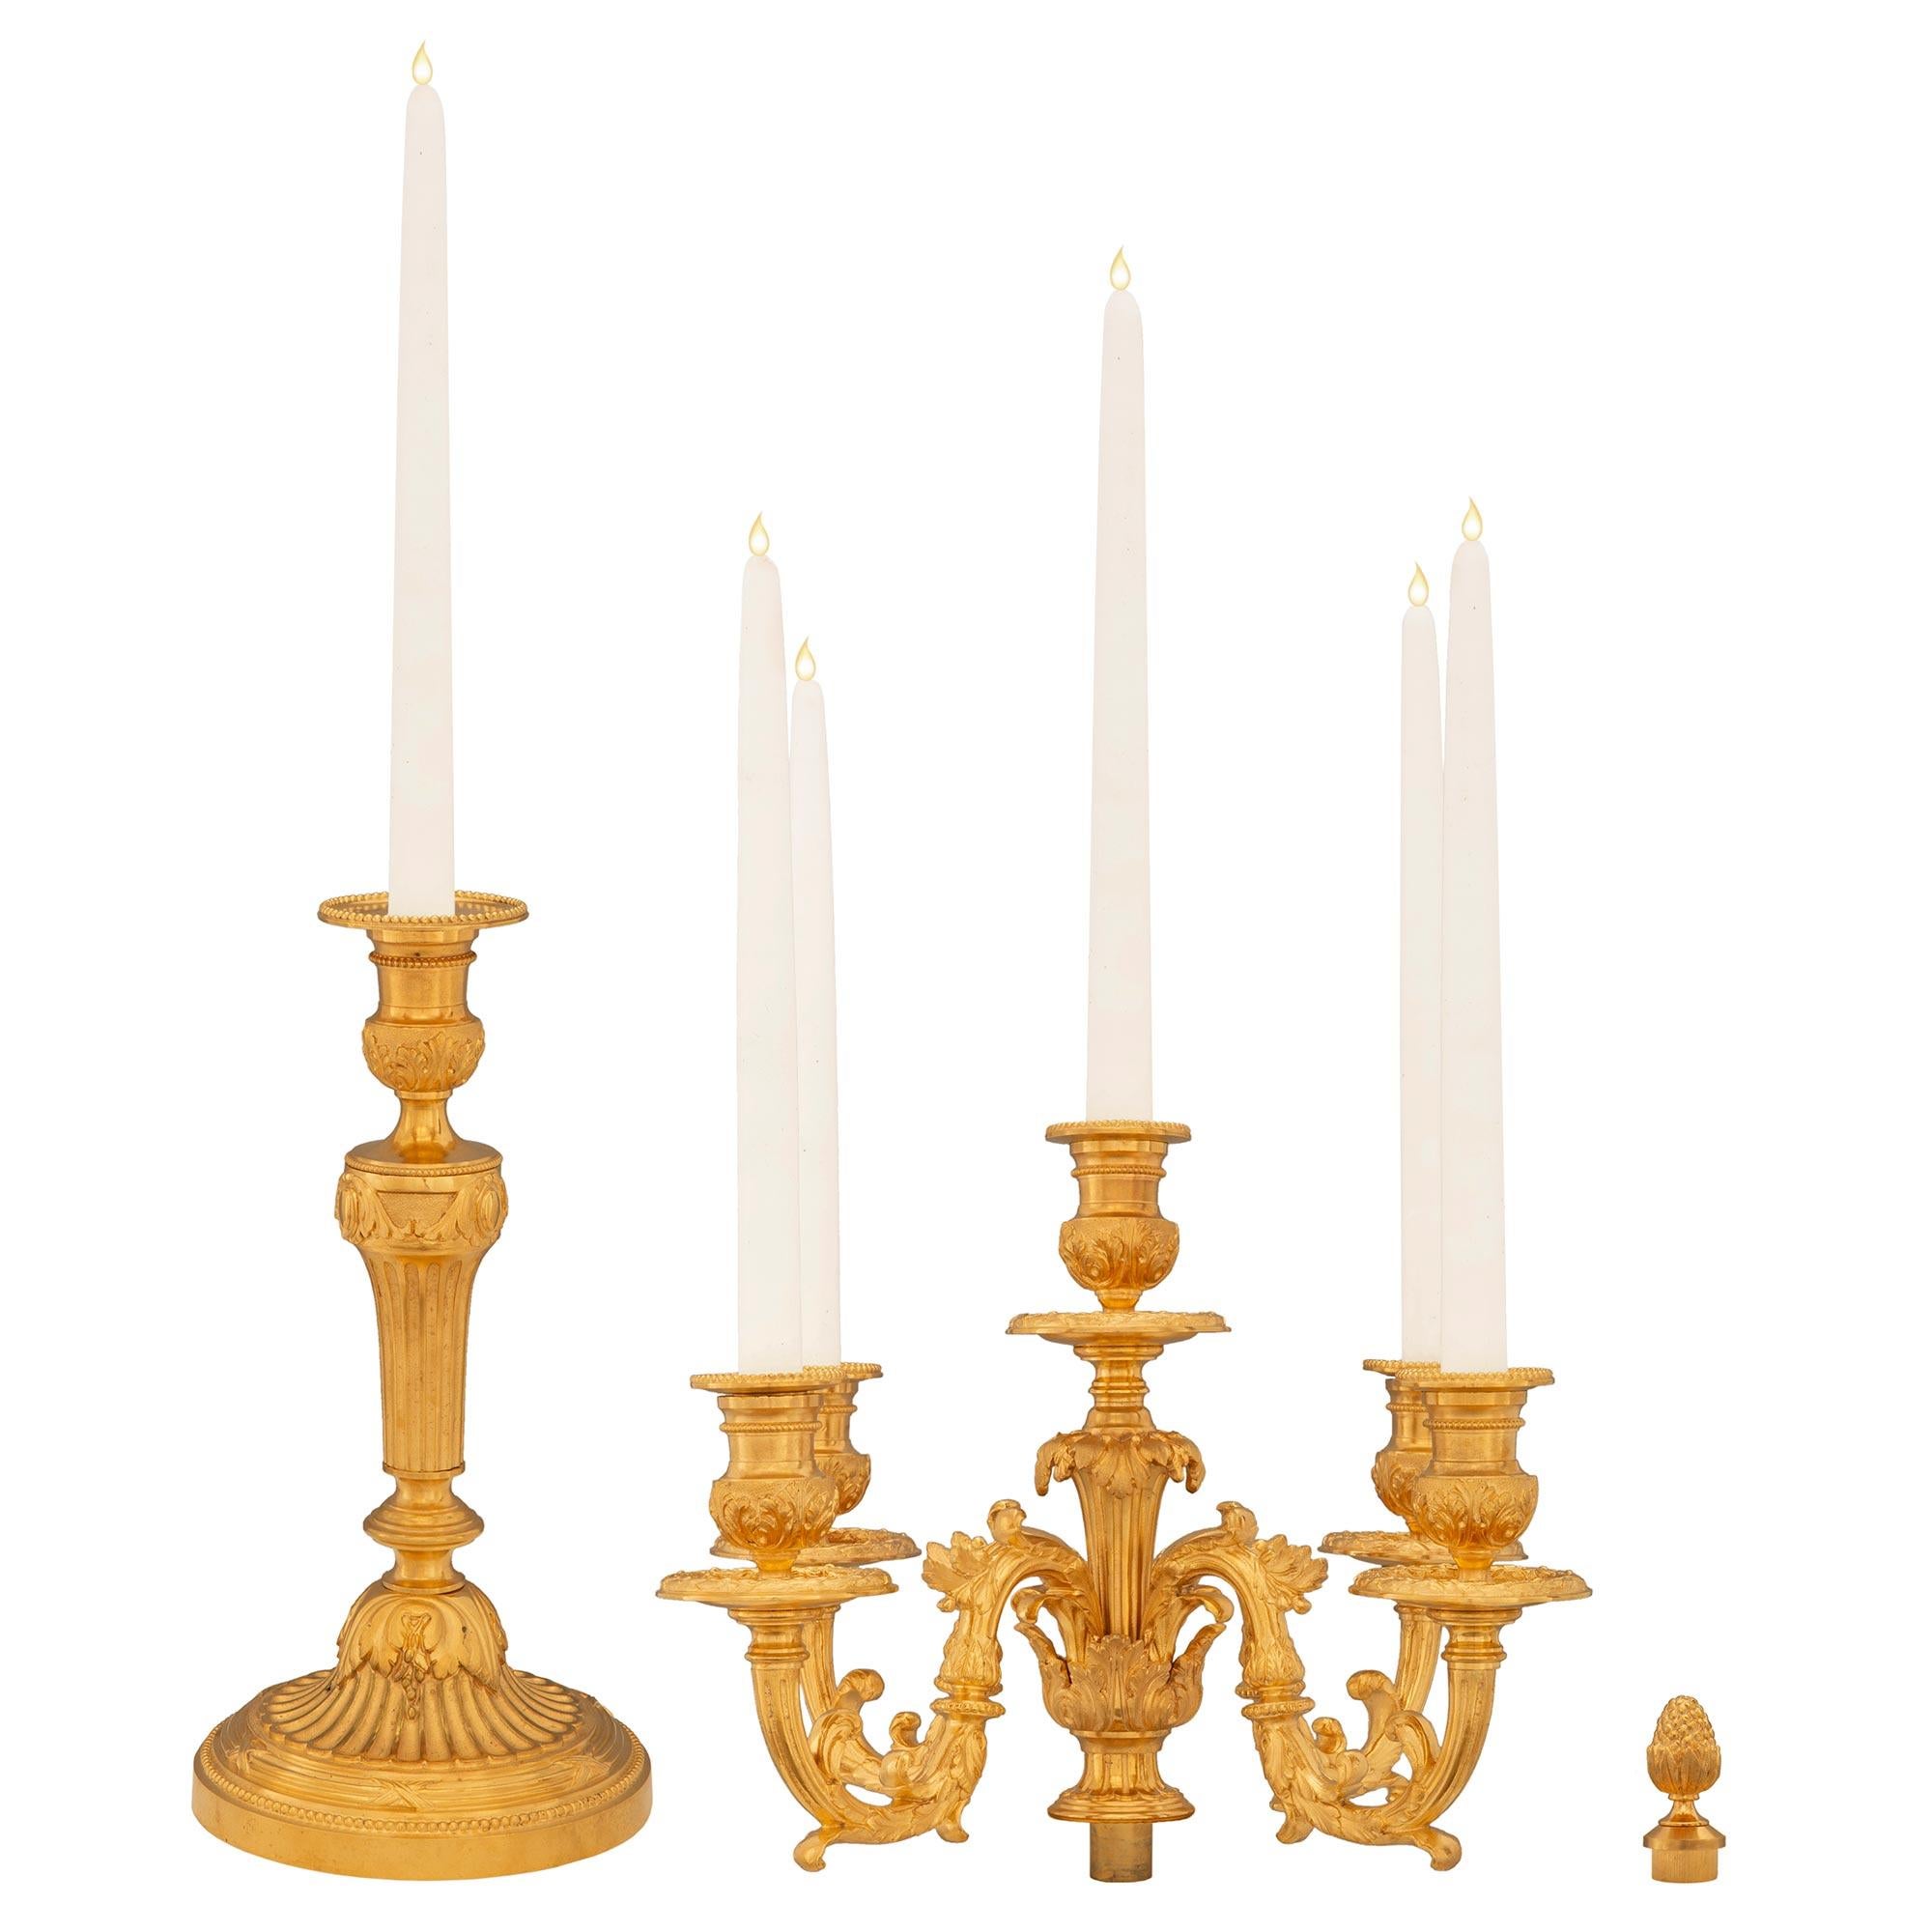 French 19th Century Louis XVI St. Ormolu Candelabras In Good Condition For Sale In West Palm Beach, FL